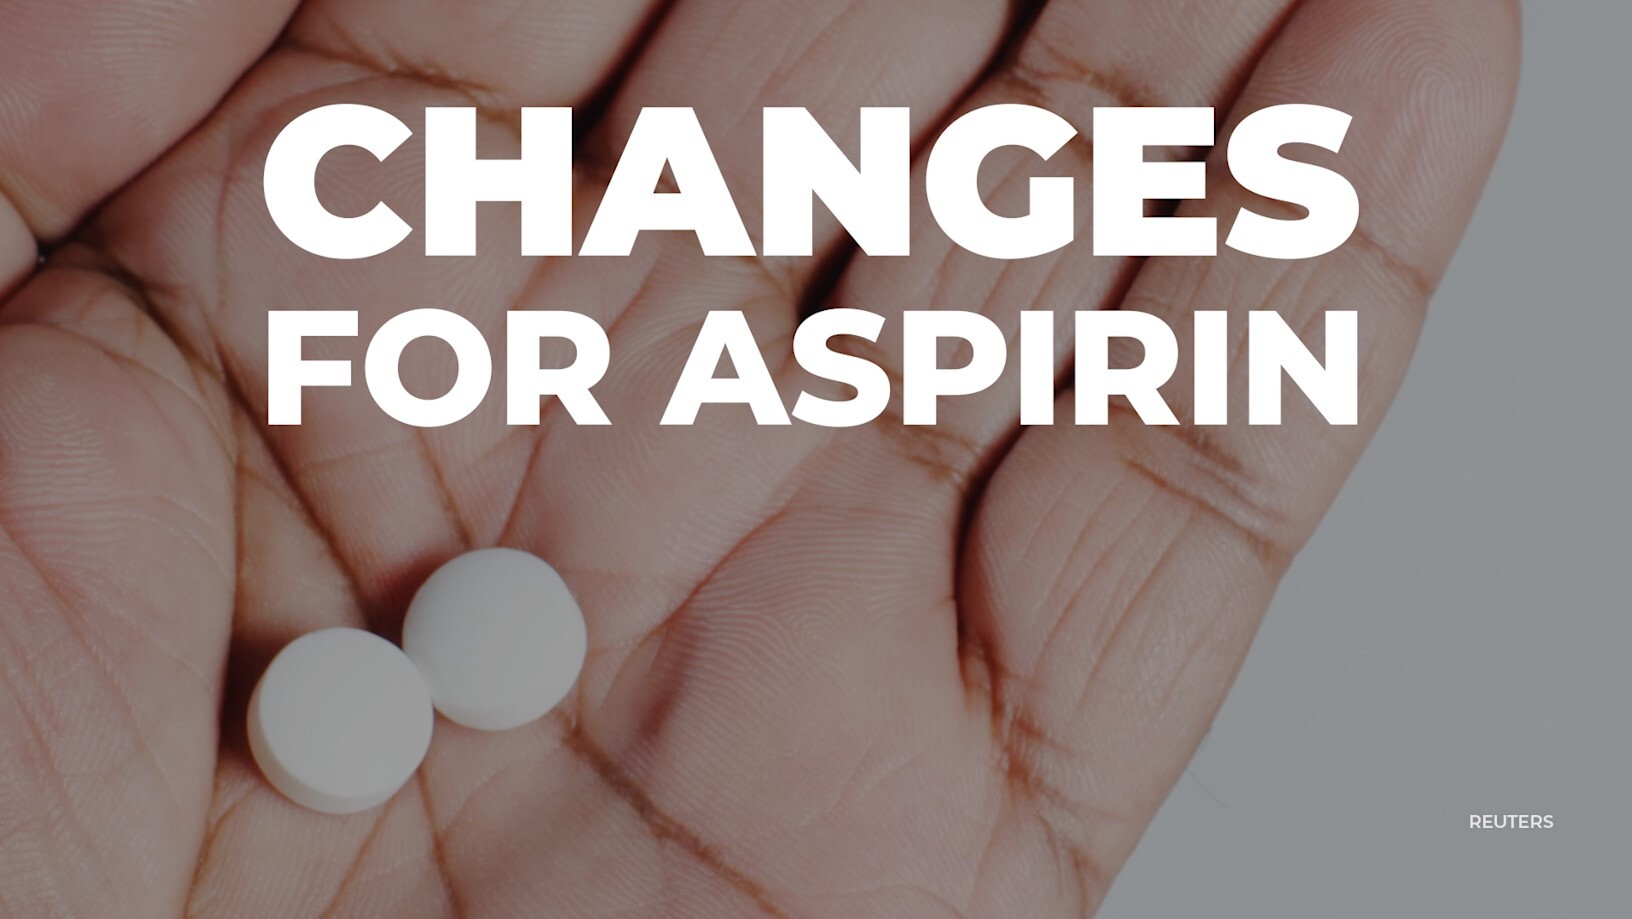 "People age 60 or older should not start taking aspirin for heart disease and stroke prevention," the U.S. Preventative Services Task Force said in its statement.